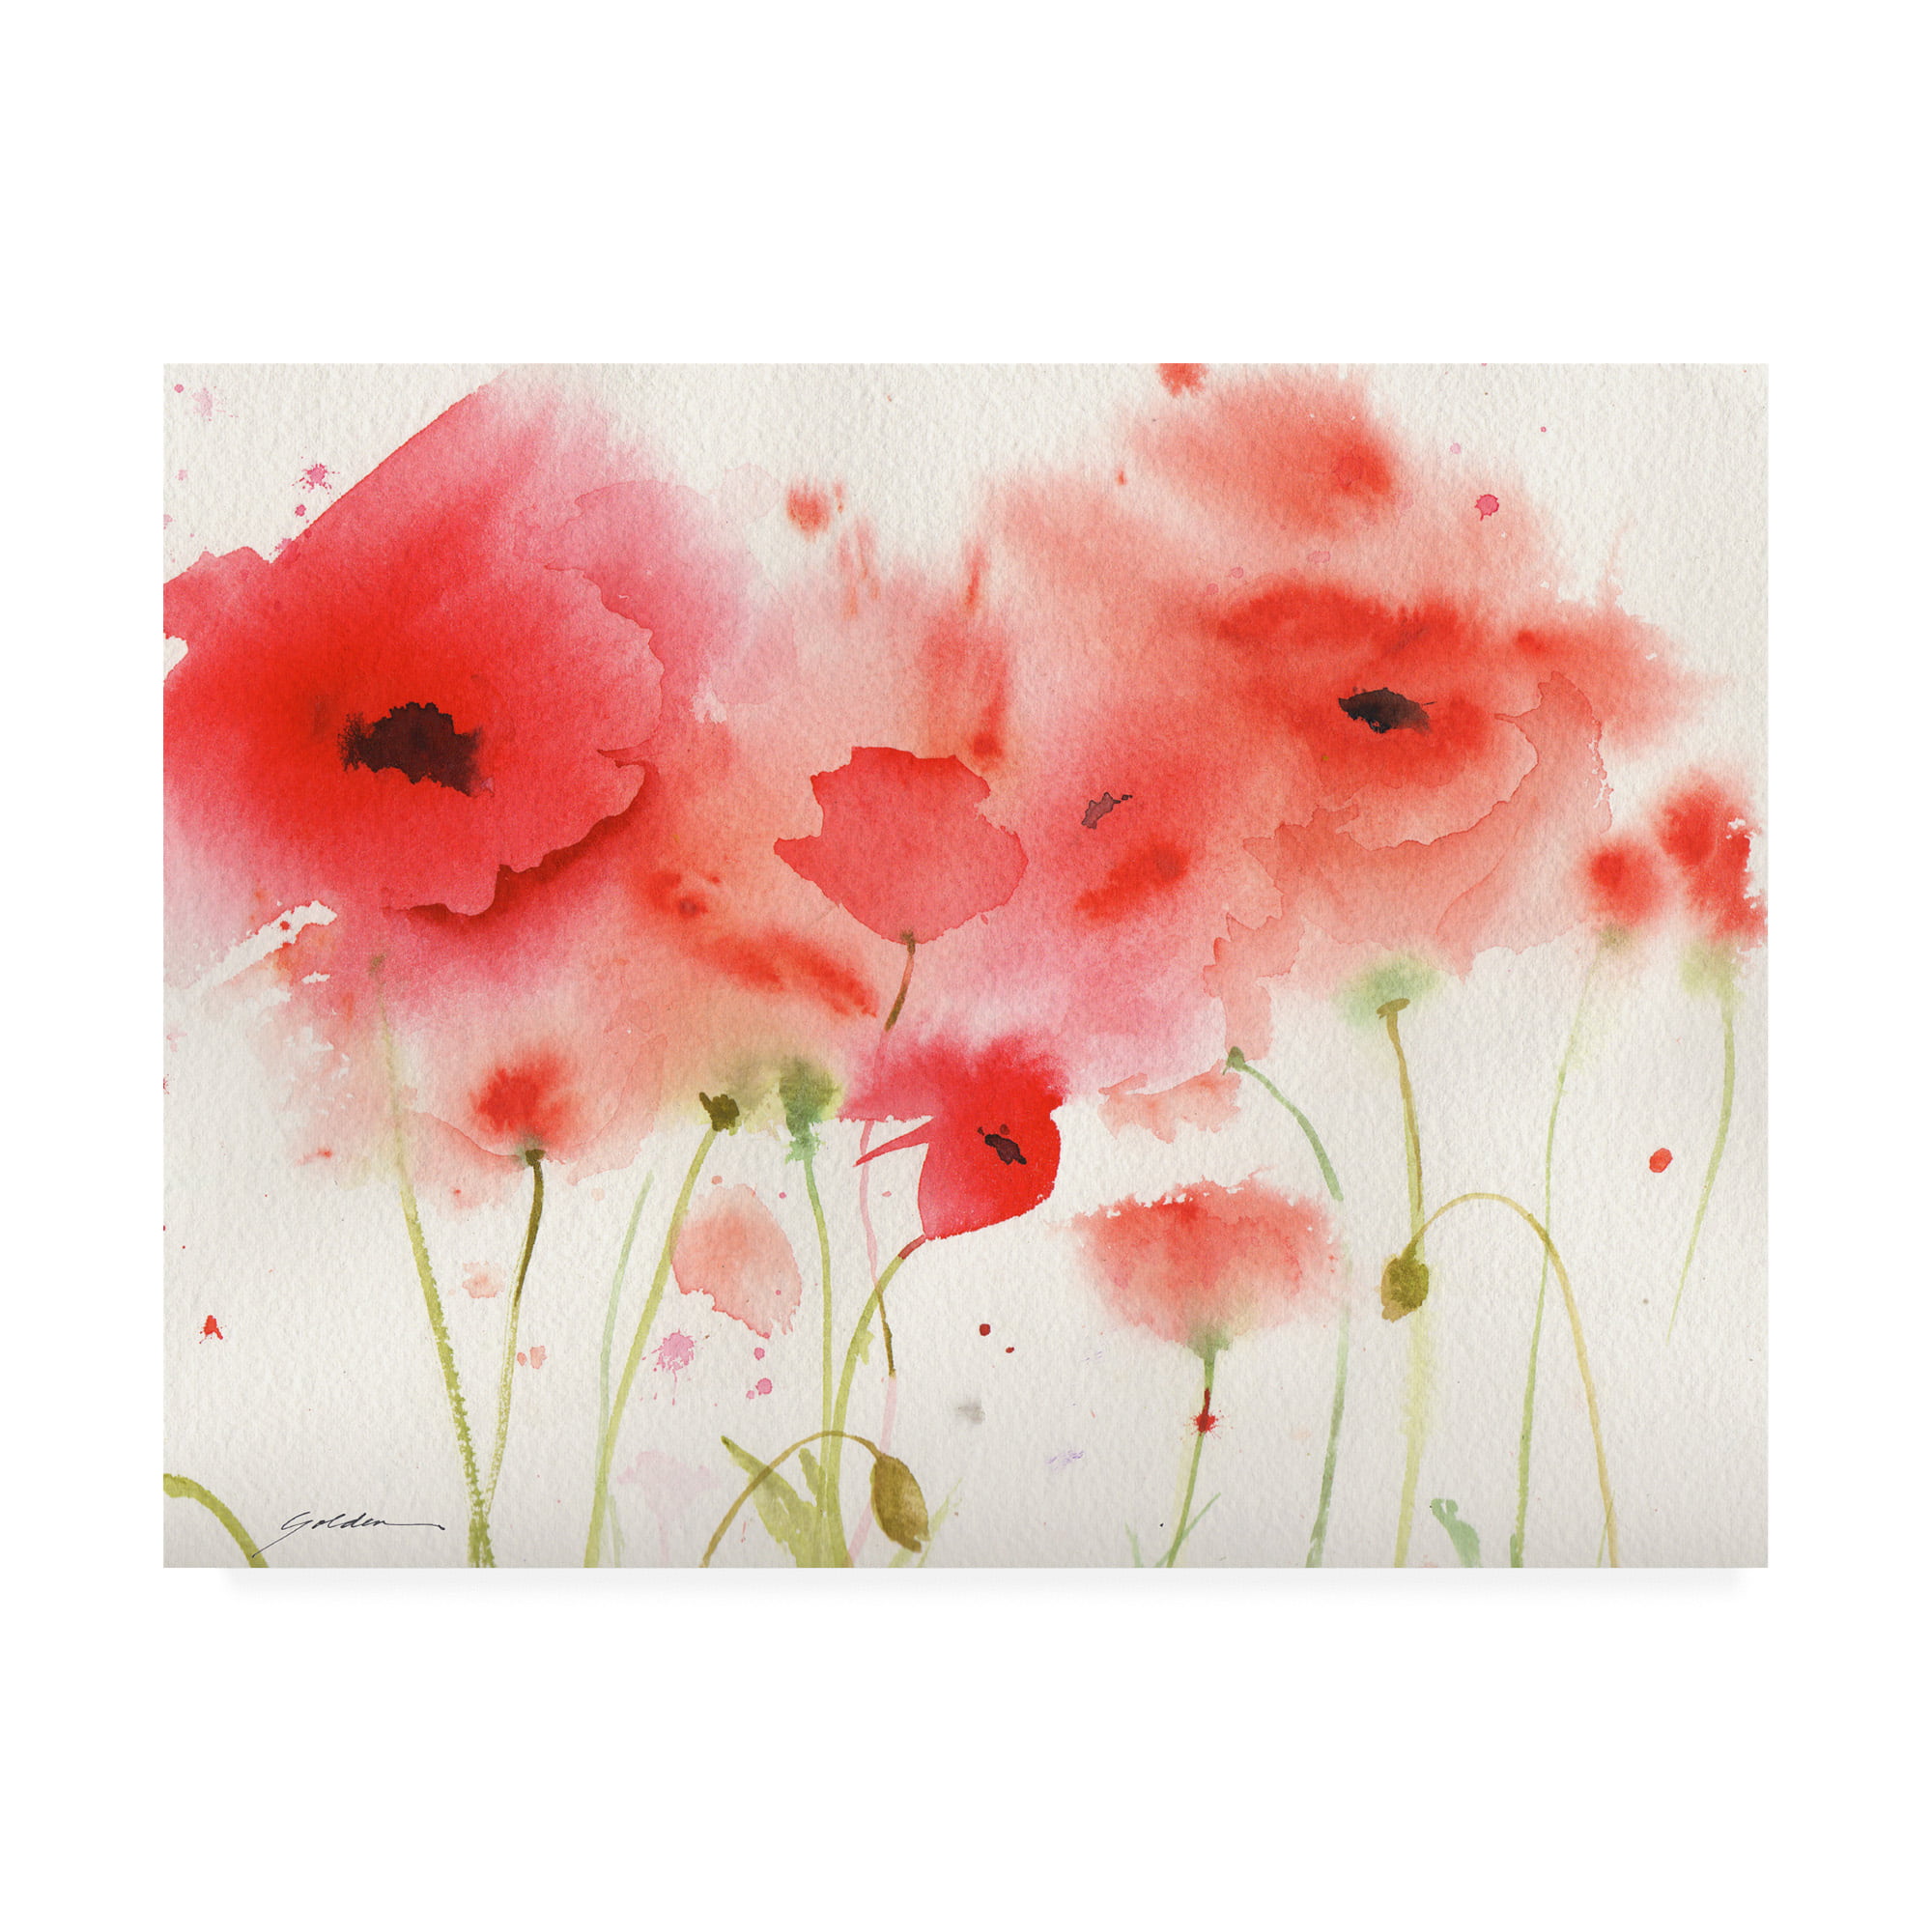 Red Poppy Oil Painting Original Painting Floral Still Life Painting on Canvas Board Poppies Painting -Artwork 12X16 Oil Painting